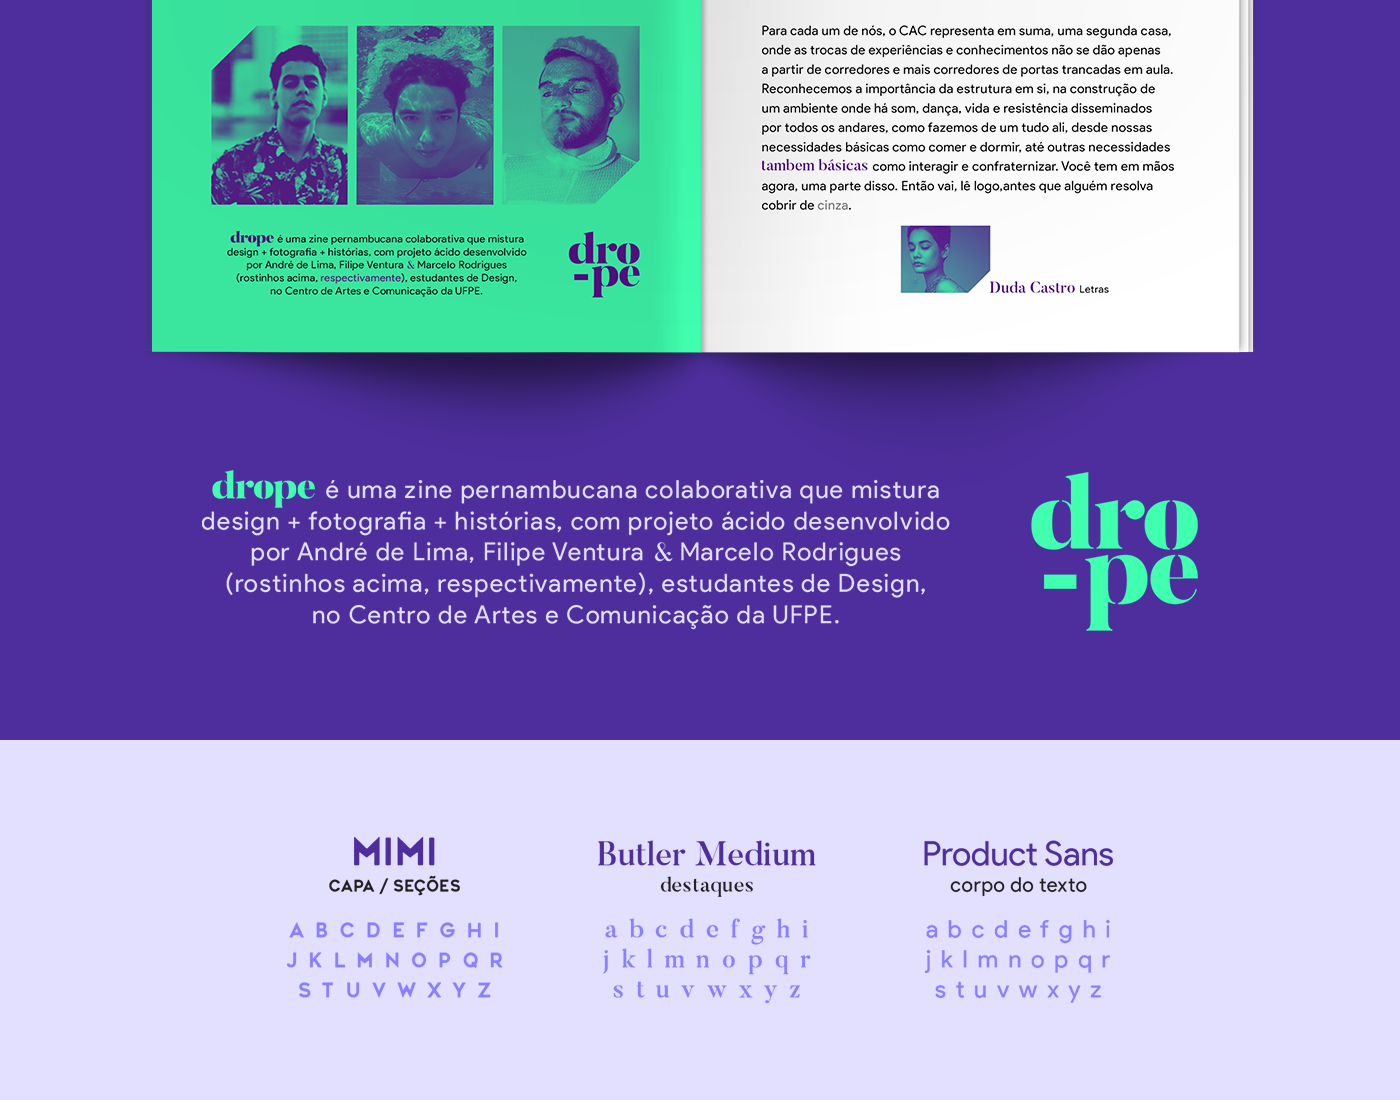 Graphic Design and Editorial: Drope